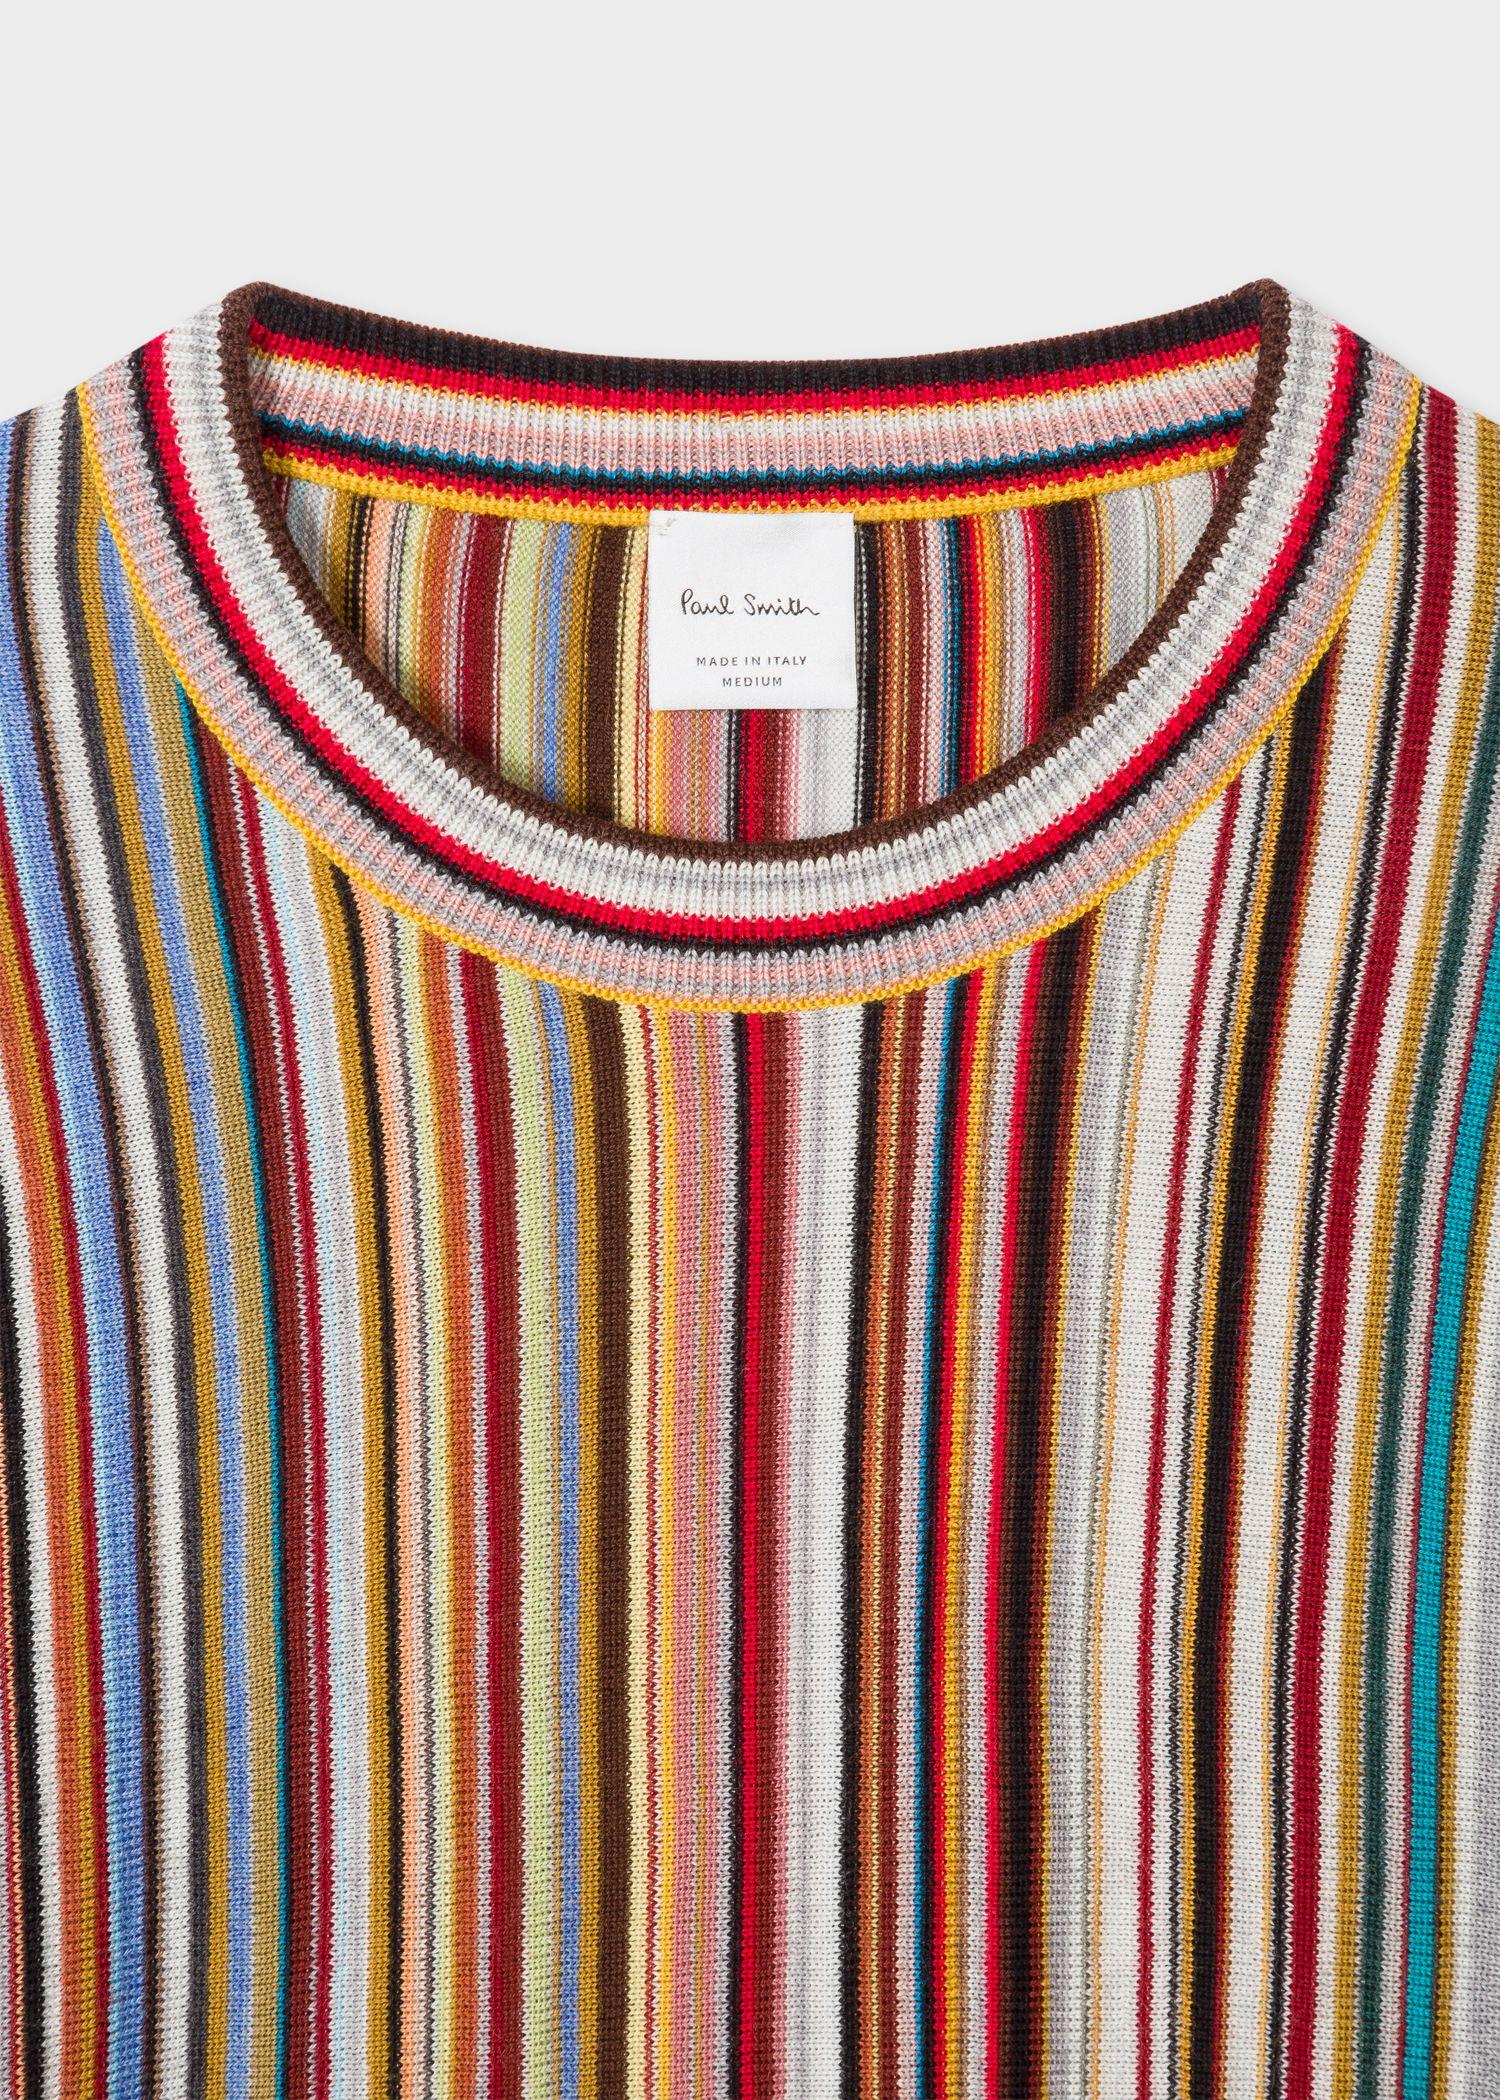 Paul Smith Signature Stripe Jacquard Wool Sweater for Men - Save 61% - Lyst